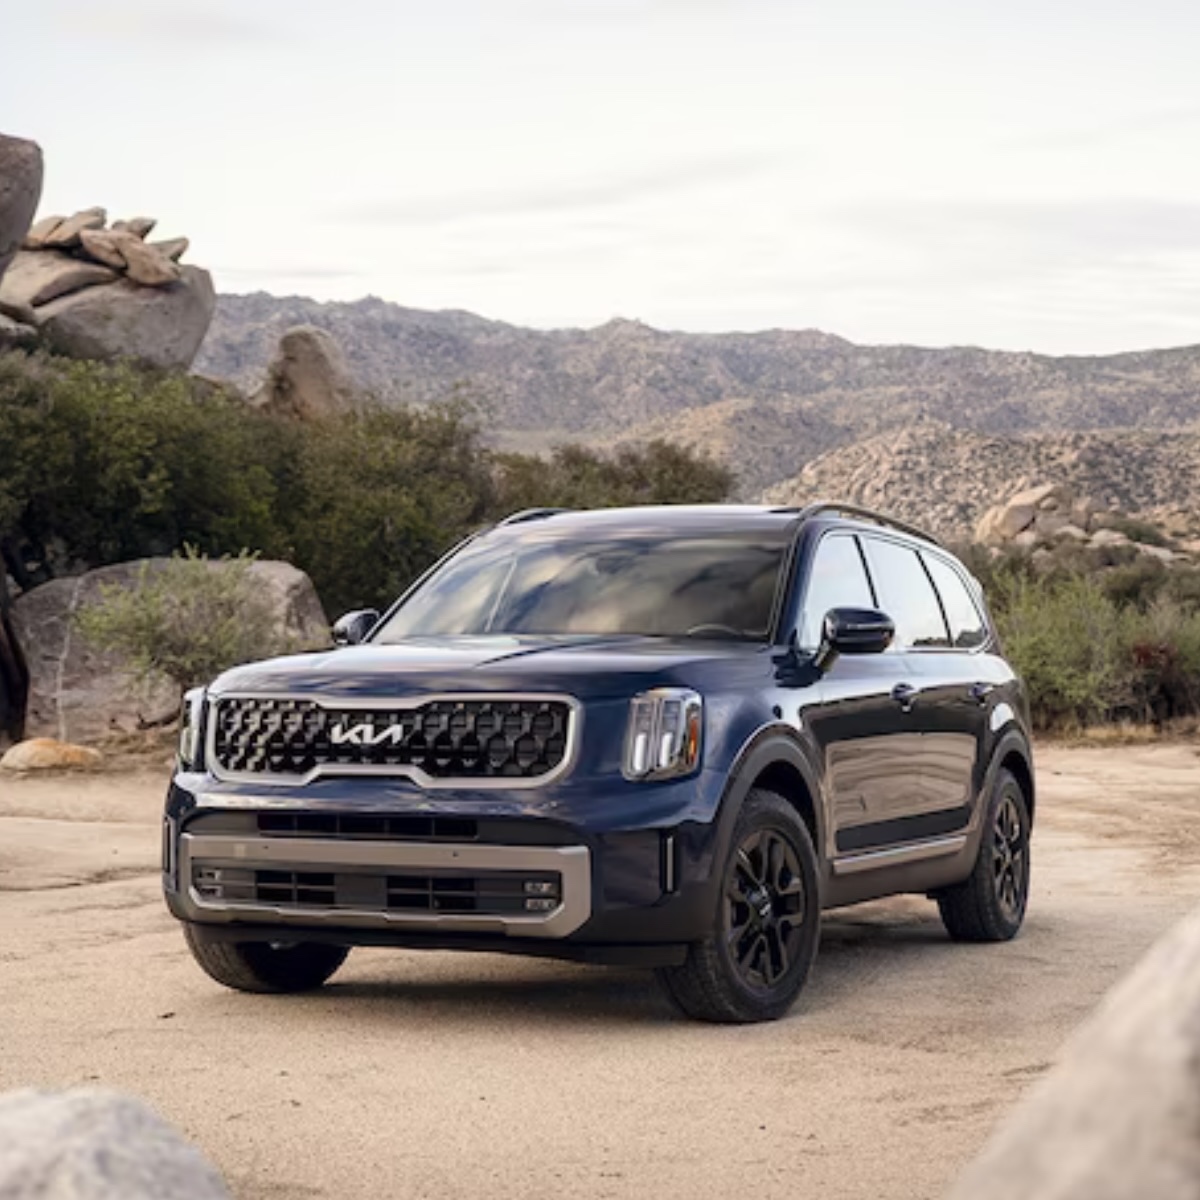 Are you ready to make every outing an experience to remember? Visit us today and take off with a stylish and capable 2024 #Kia #Telluride! The sooner you come in, the sooner your adventures can begin with a touch of elegance. #CarCrushWednesday #KiaUSA